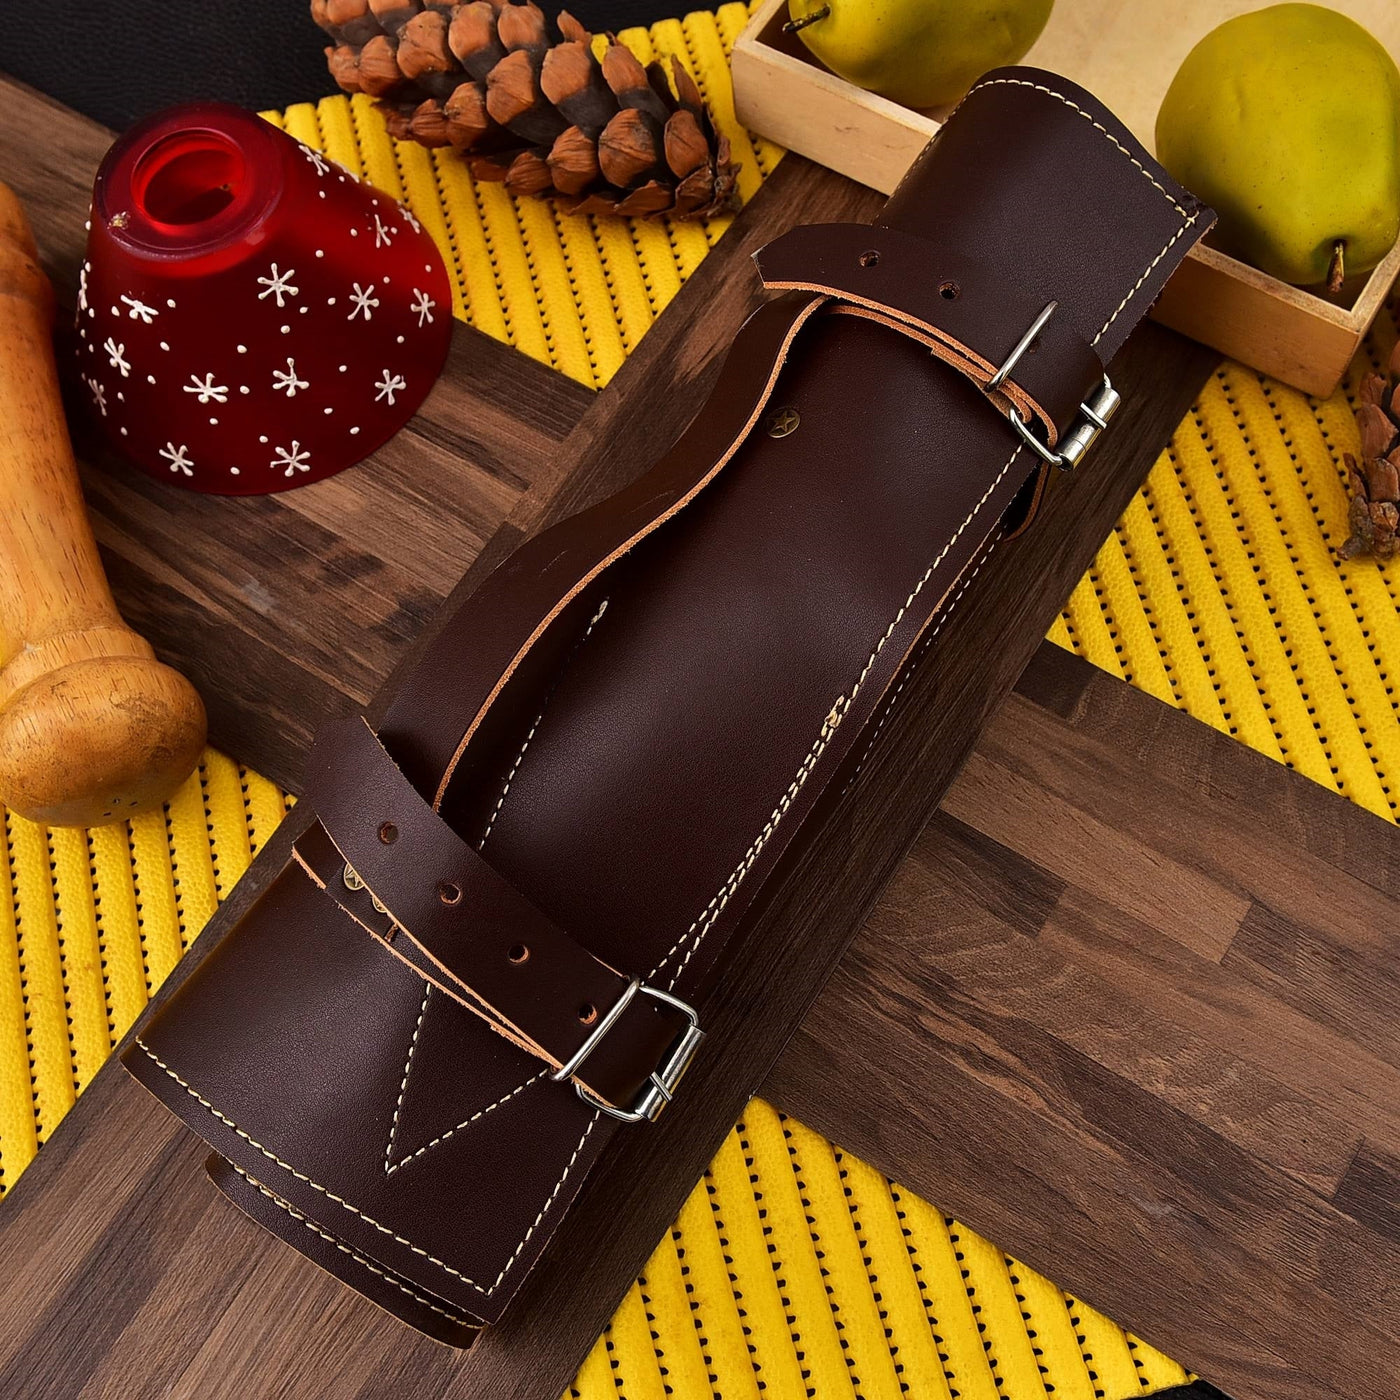 Brown Wood Handles Classical Kitchen Knife Set of 5 with Leather Bag